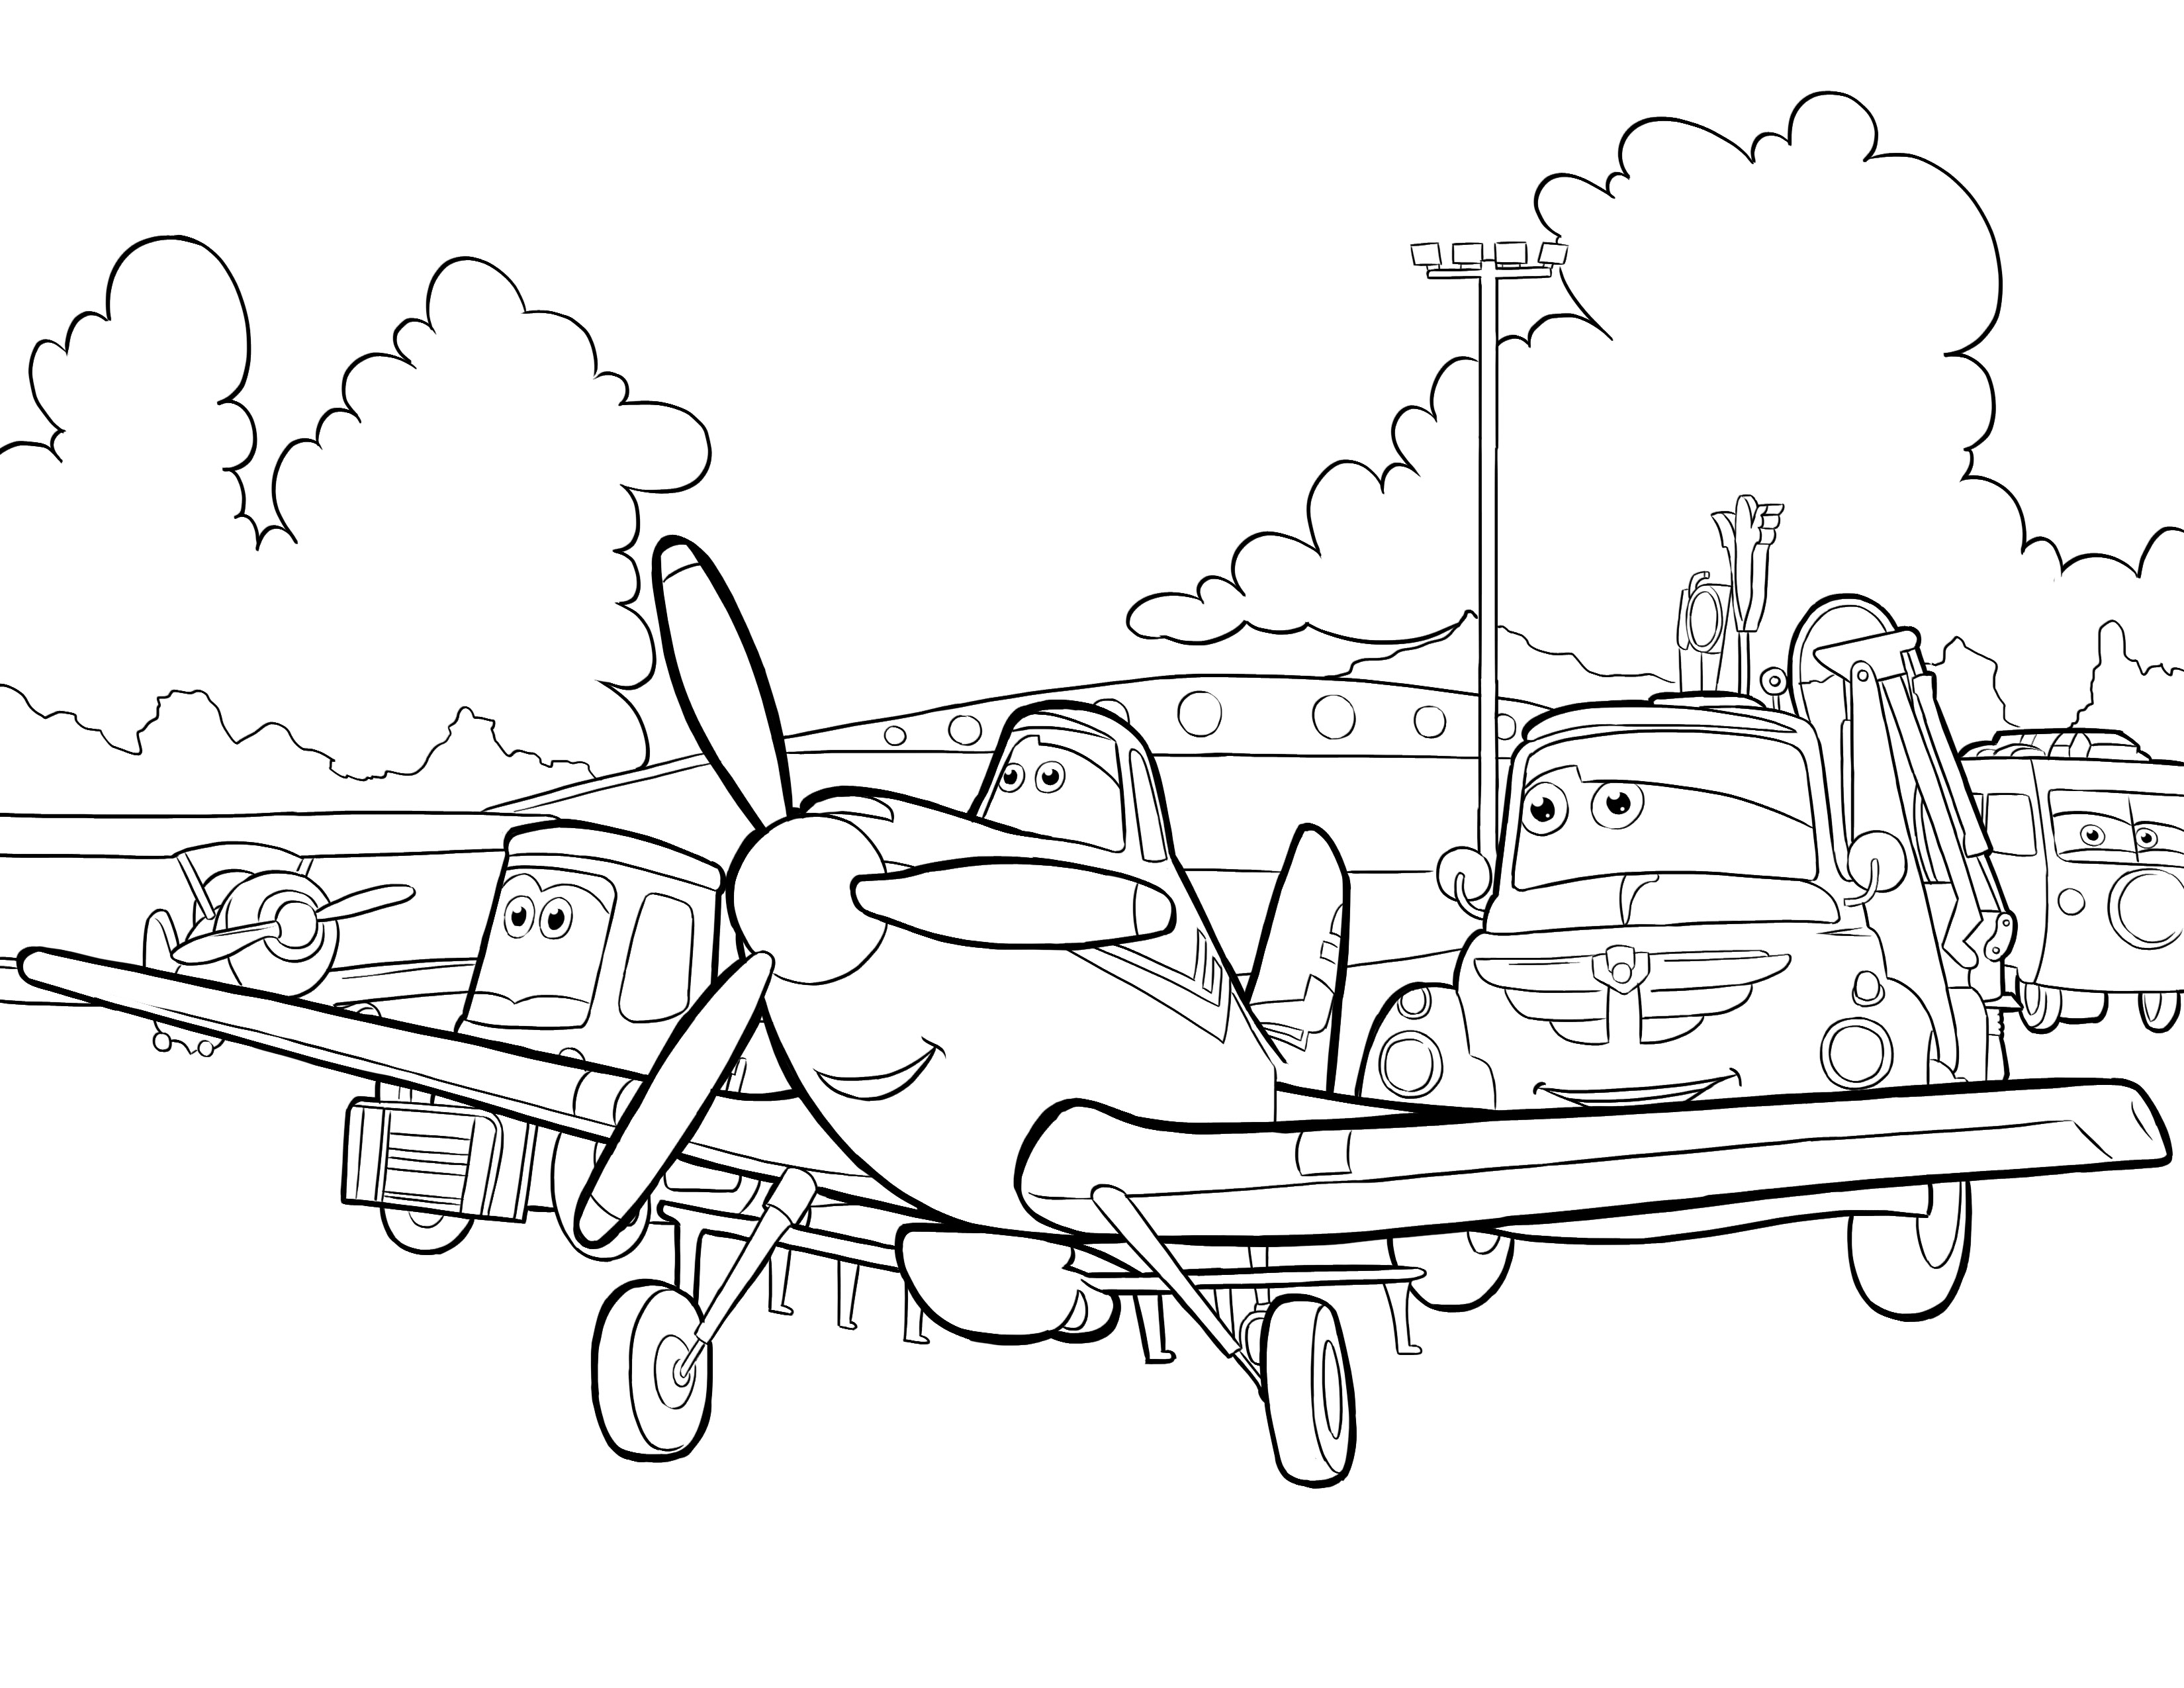 Planes coloring #11, Download drawings